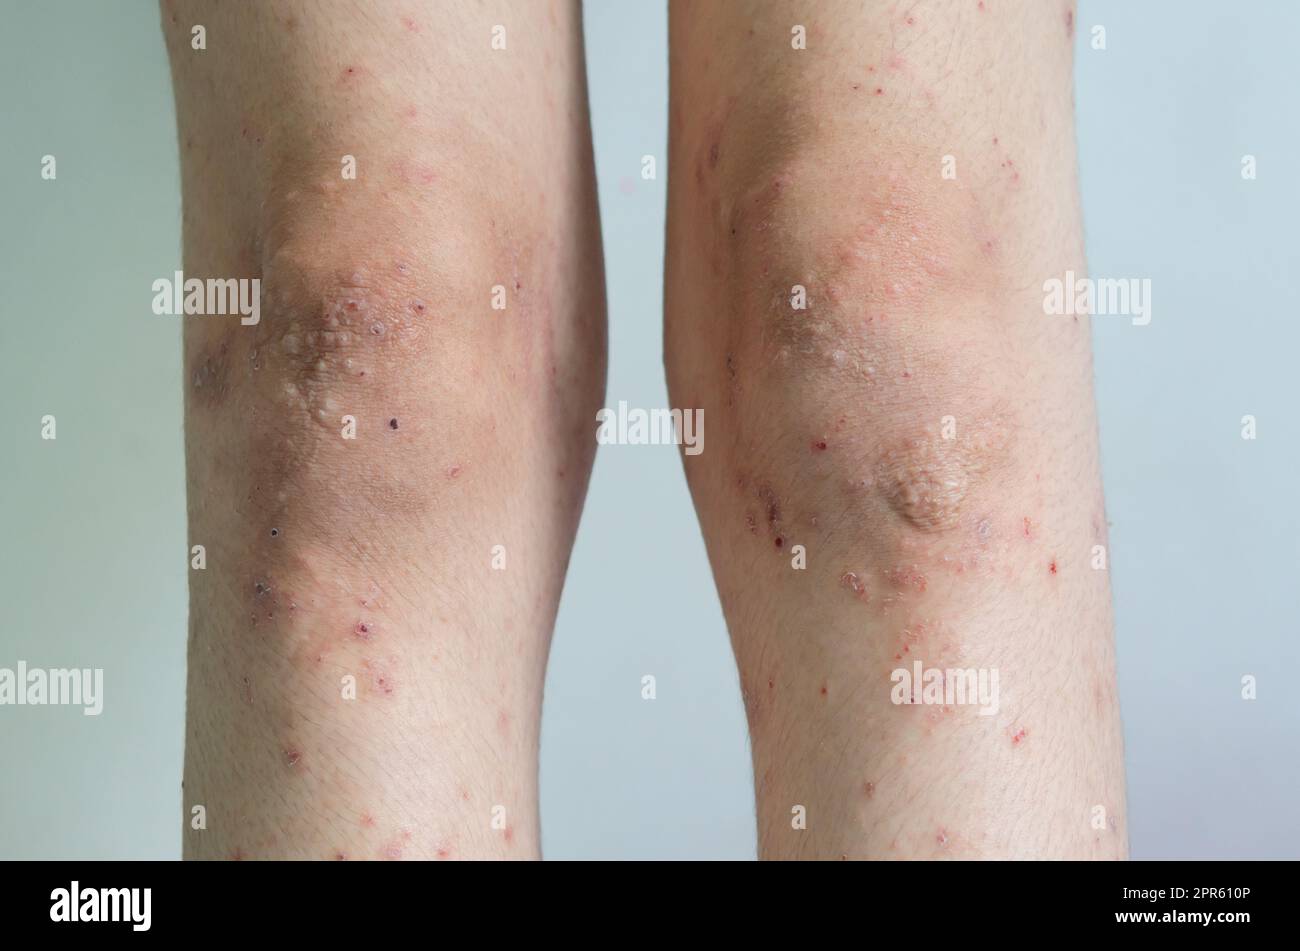 red rash girl Skin disease caused by allergies to drugs, food, chemicals, poor immune system in the lymph. Stock Photo